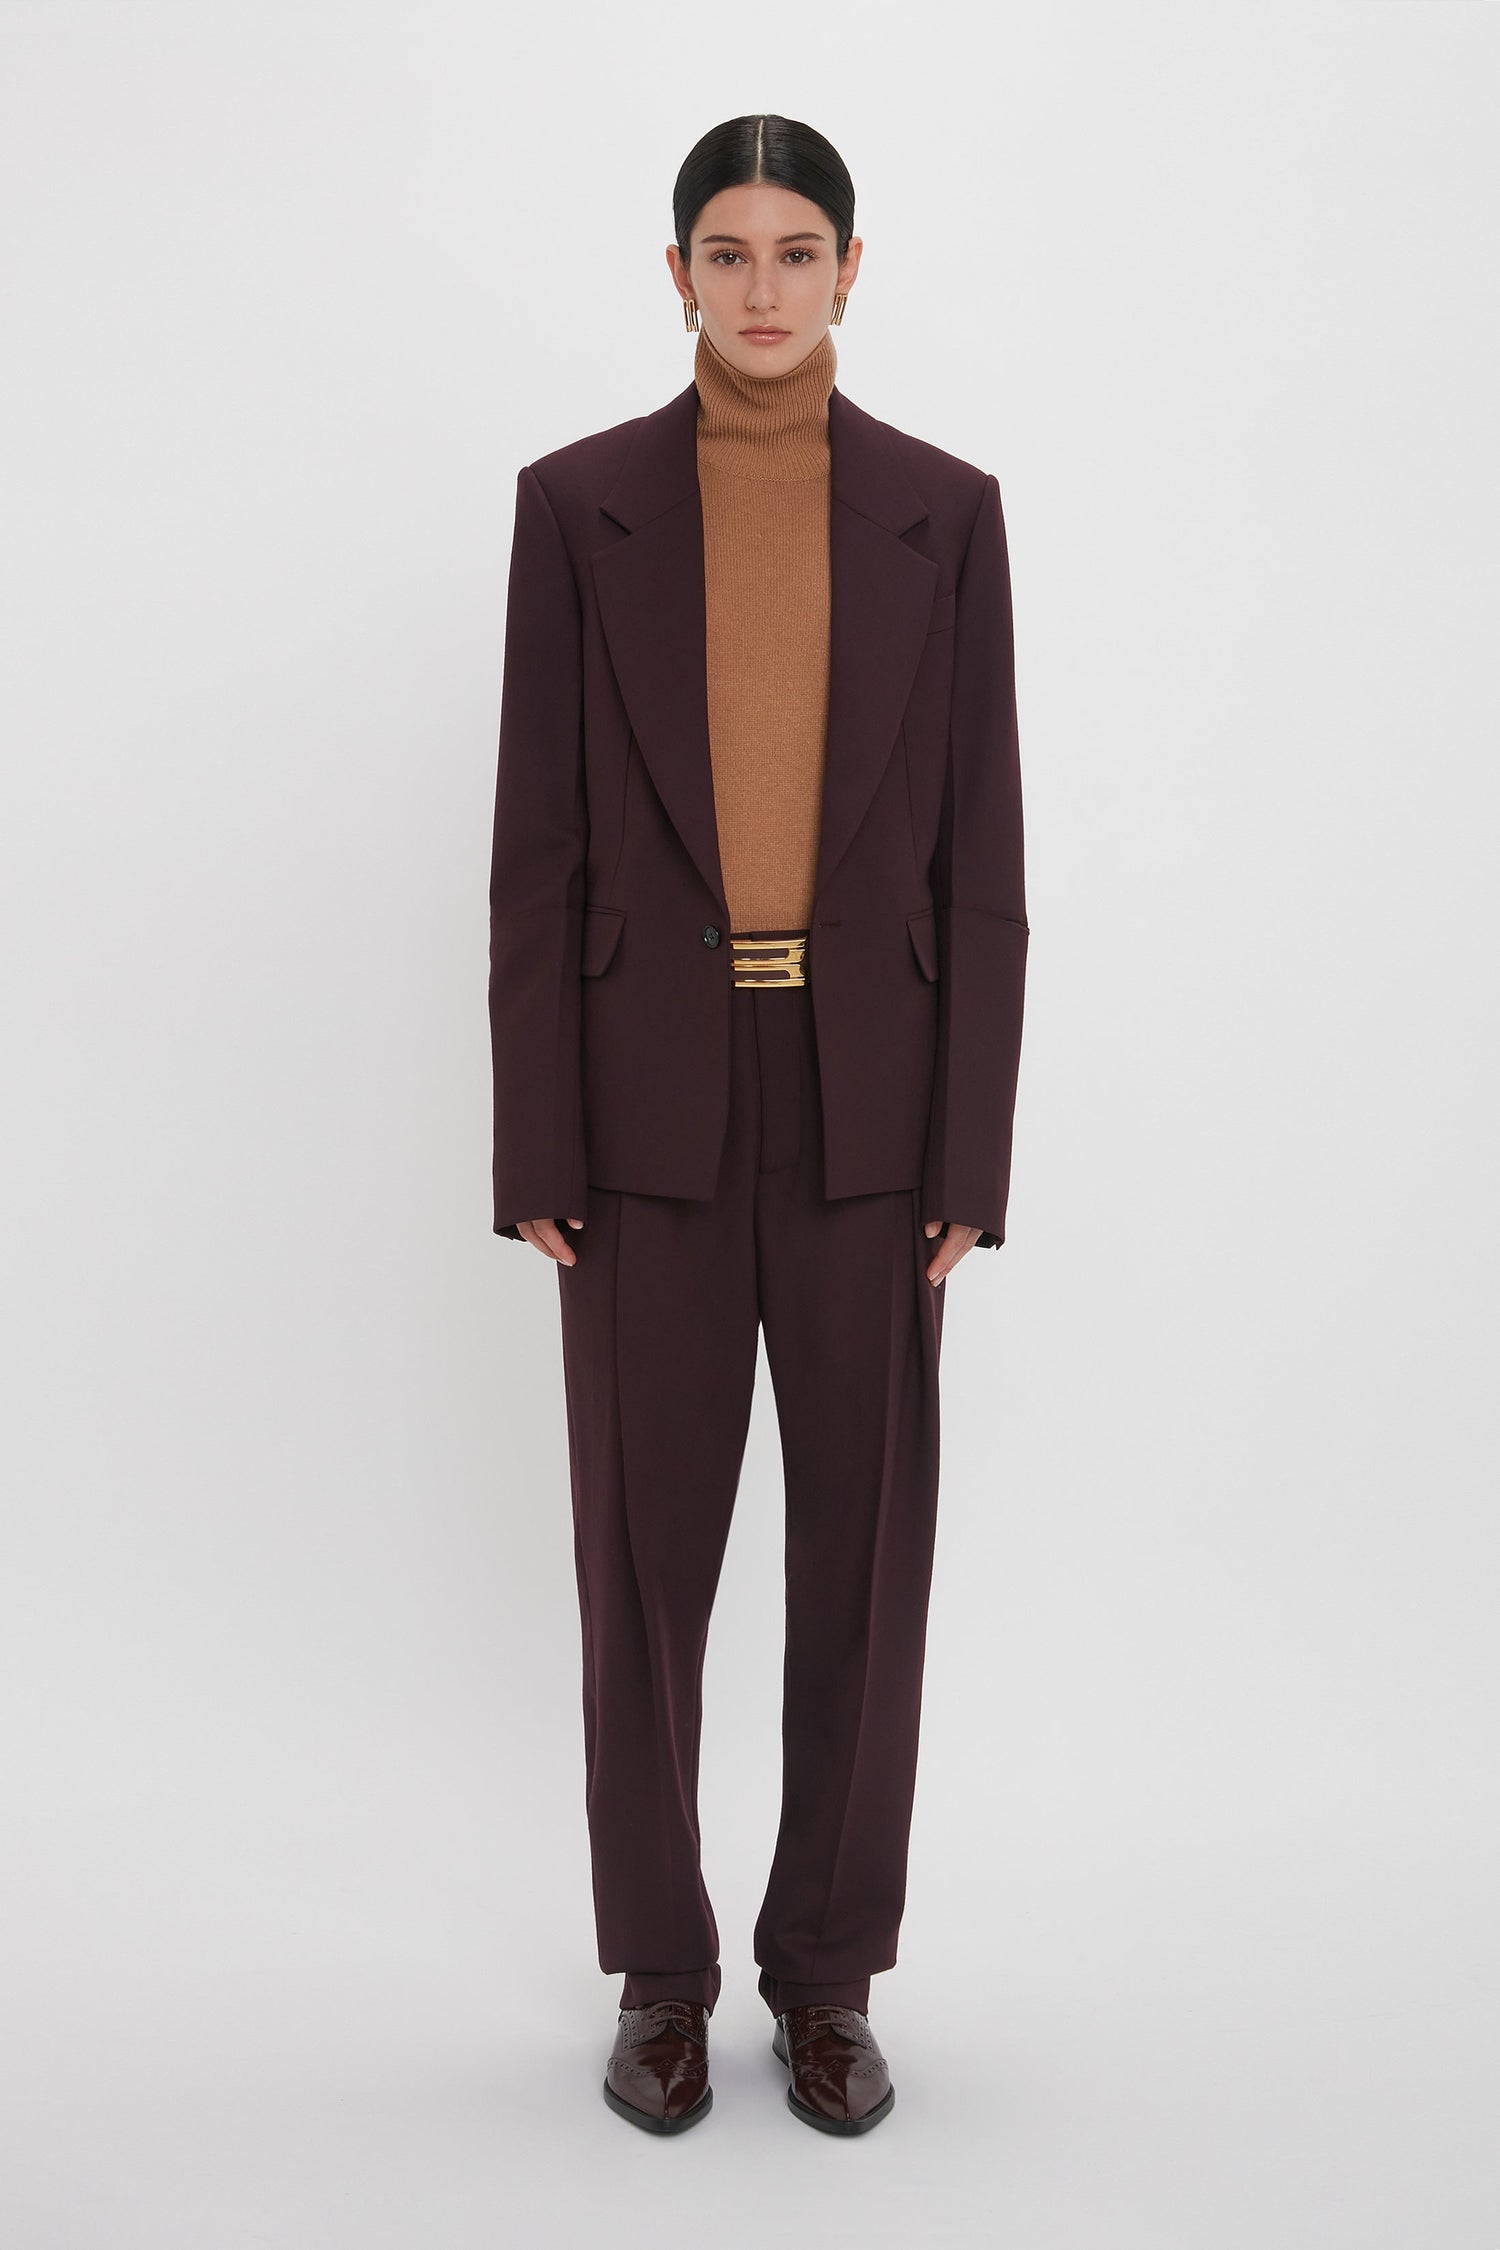 Person standing against a white background, dressed in a Victoria Beckham Sleeve Detail Patch Pocket Jacket In Deep Mahogany and pants with a brown turtleneck underneath, wearing dark shoes and gold earrings.